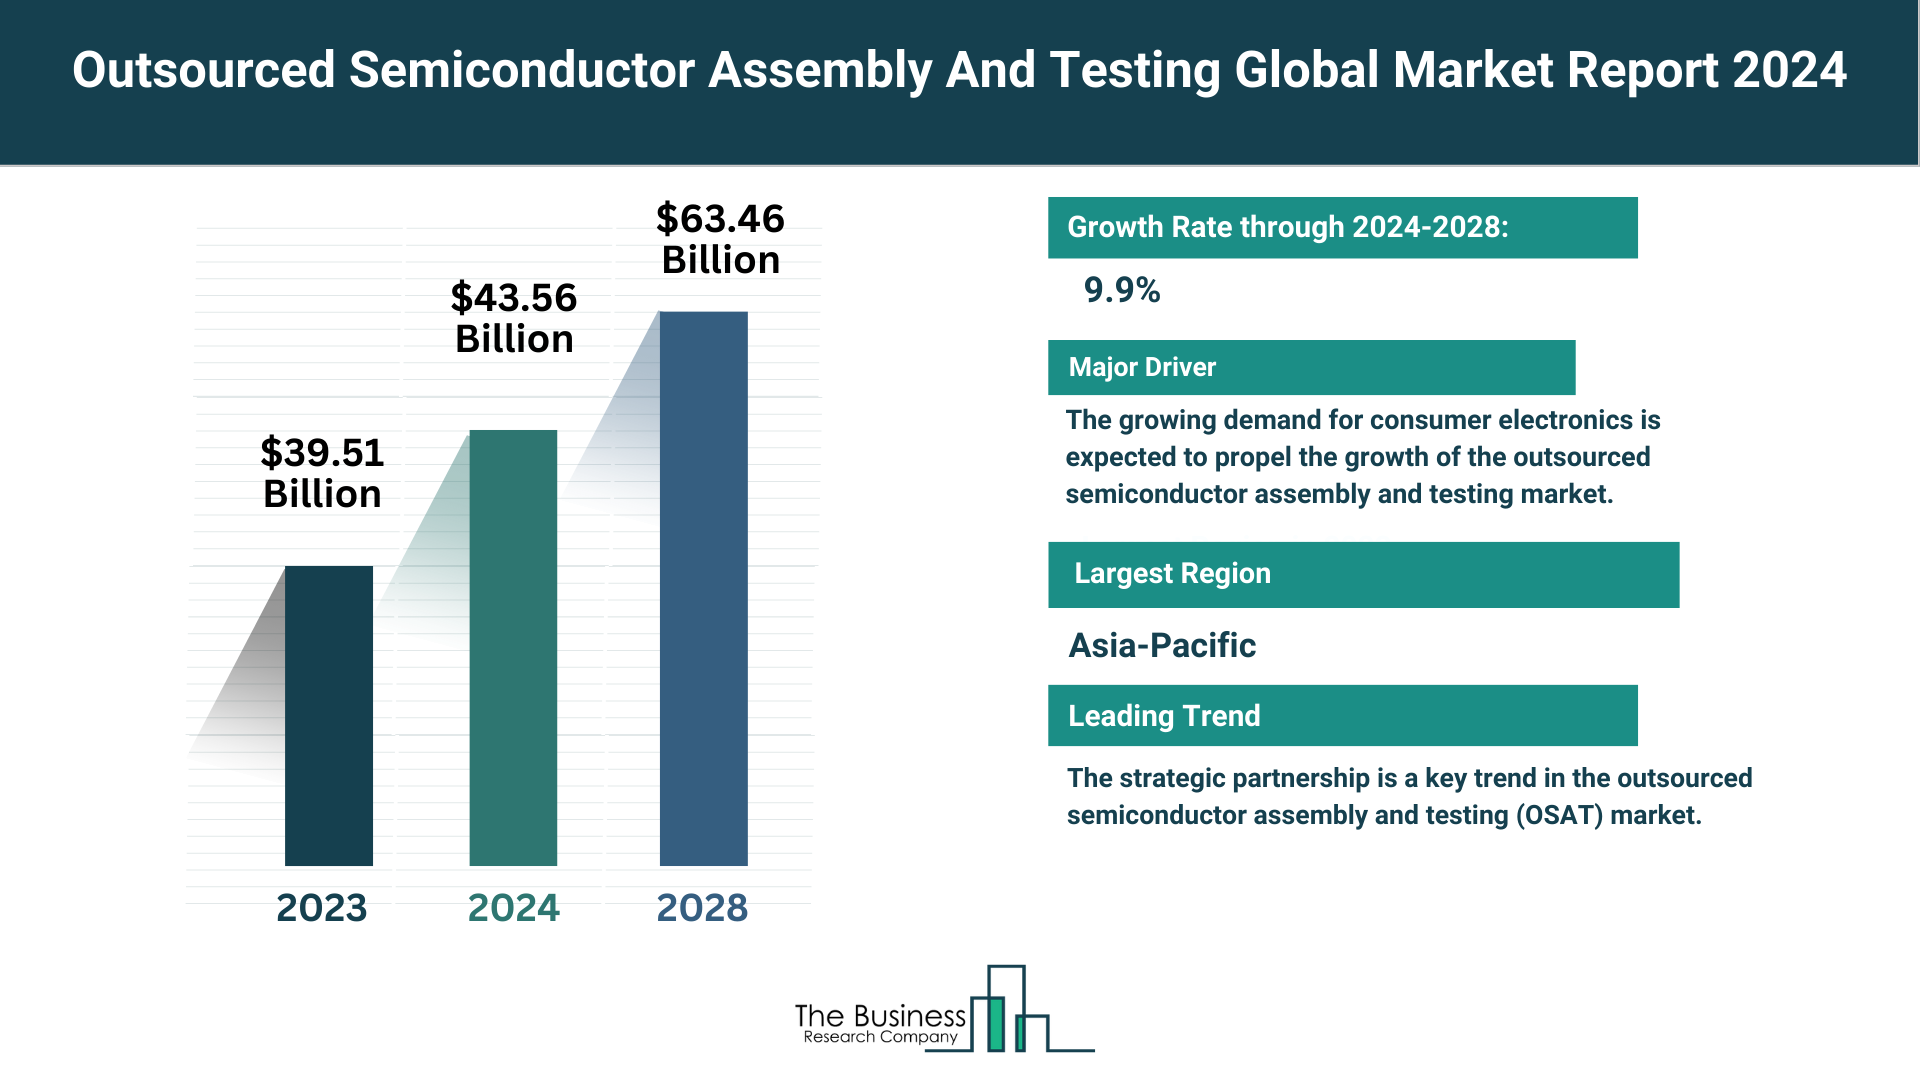 Global Outsourced Semiconductor Assembly And Testing Market Report 2024: Size, Drivers, And Top Segments